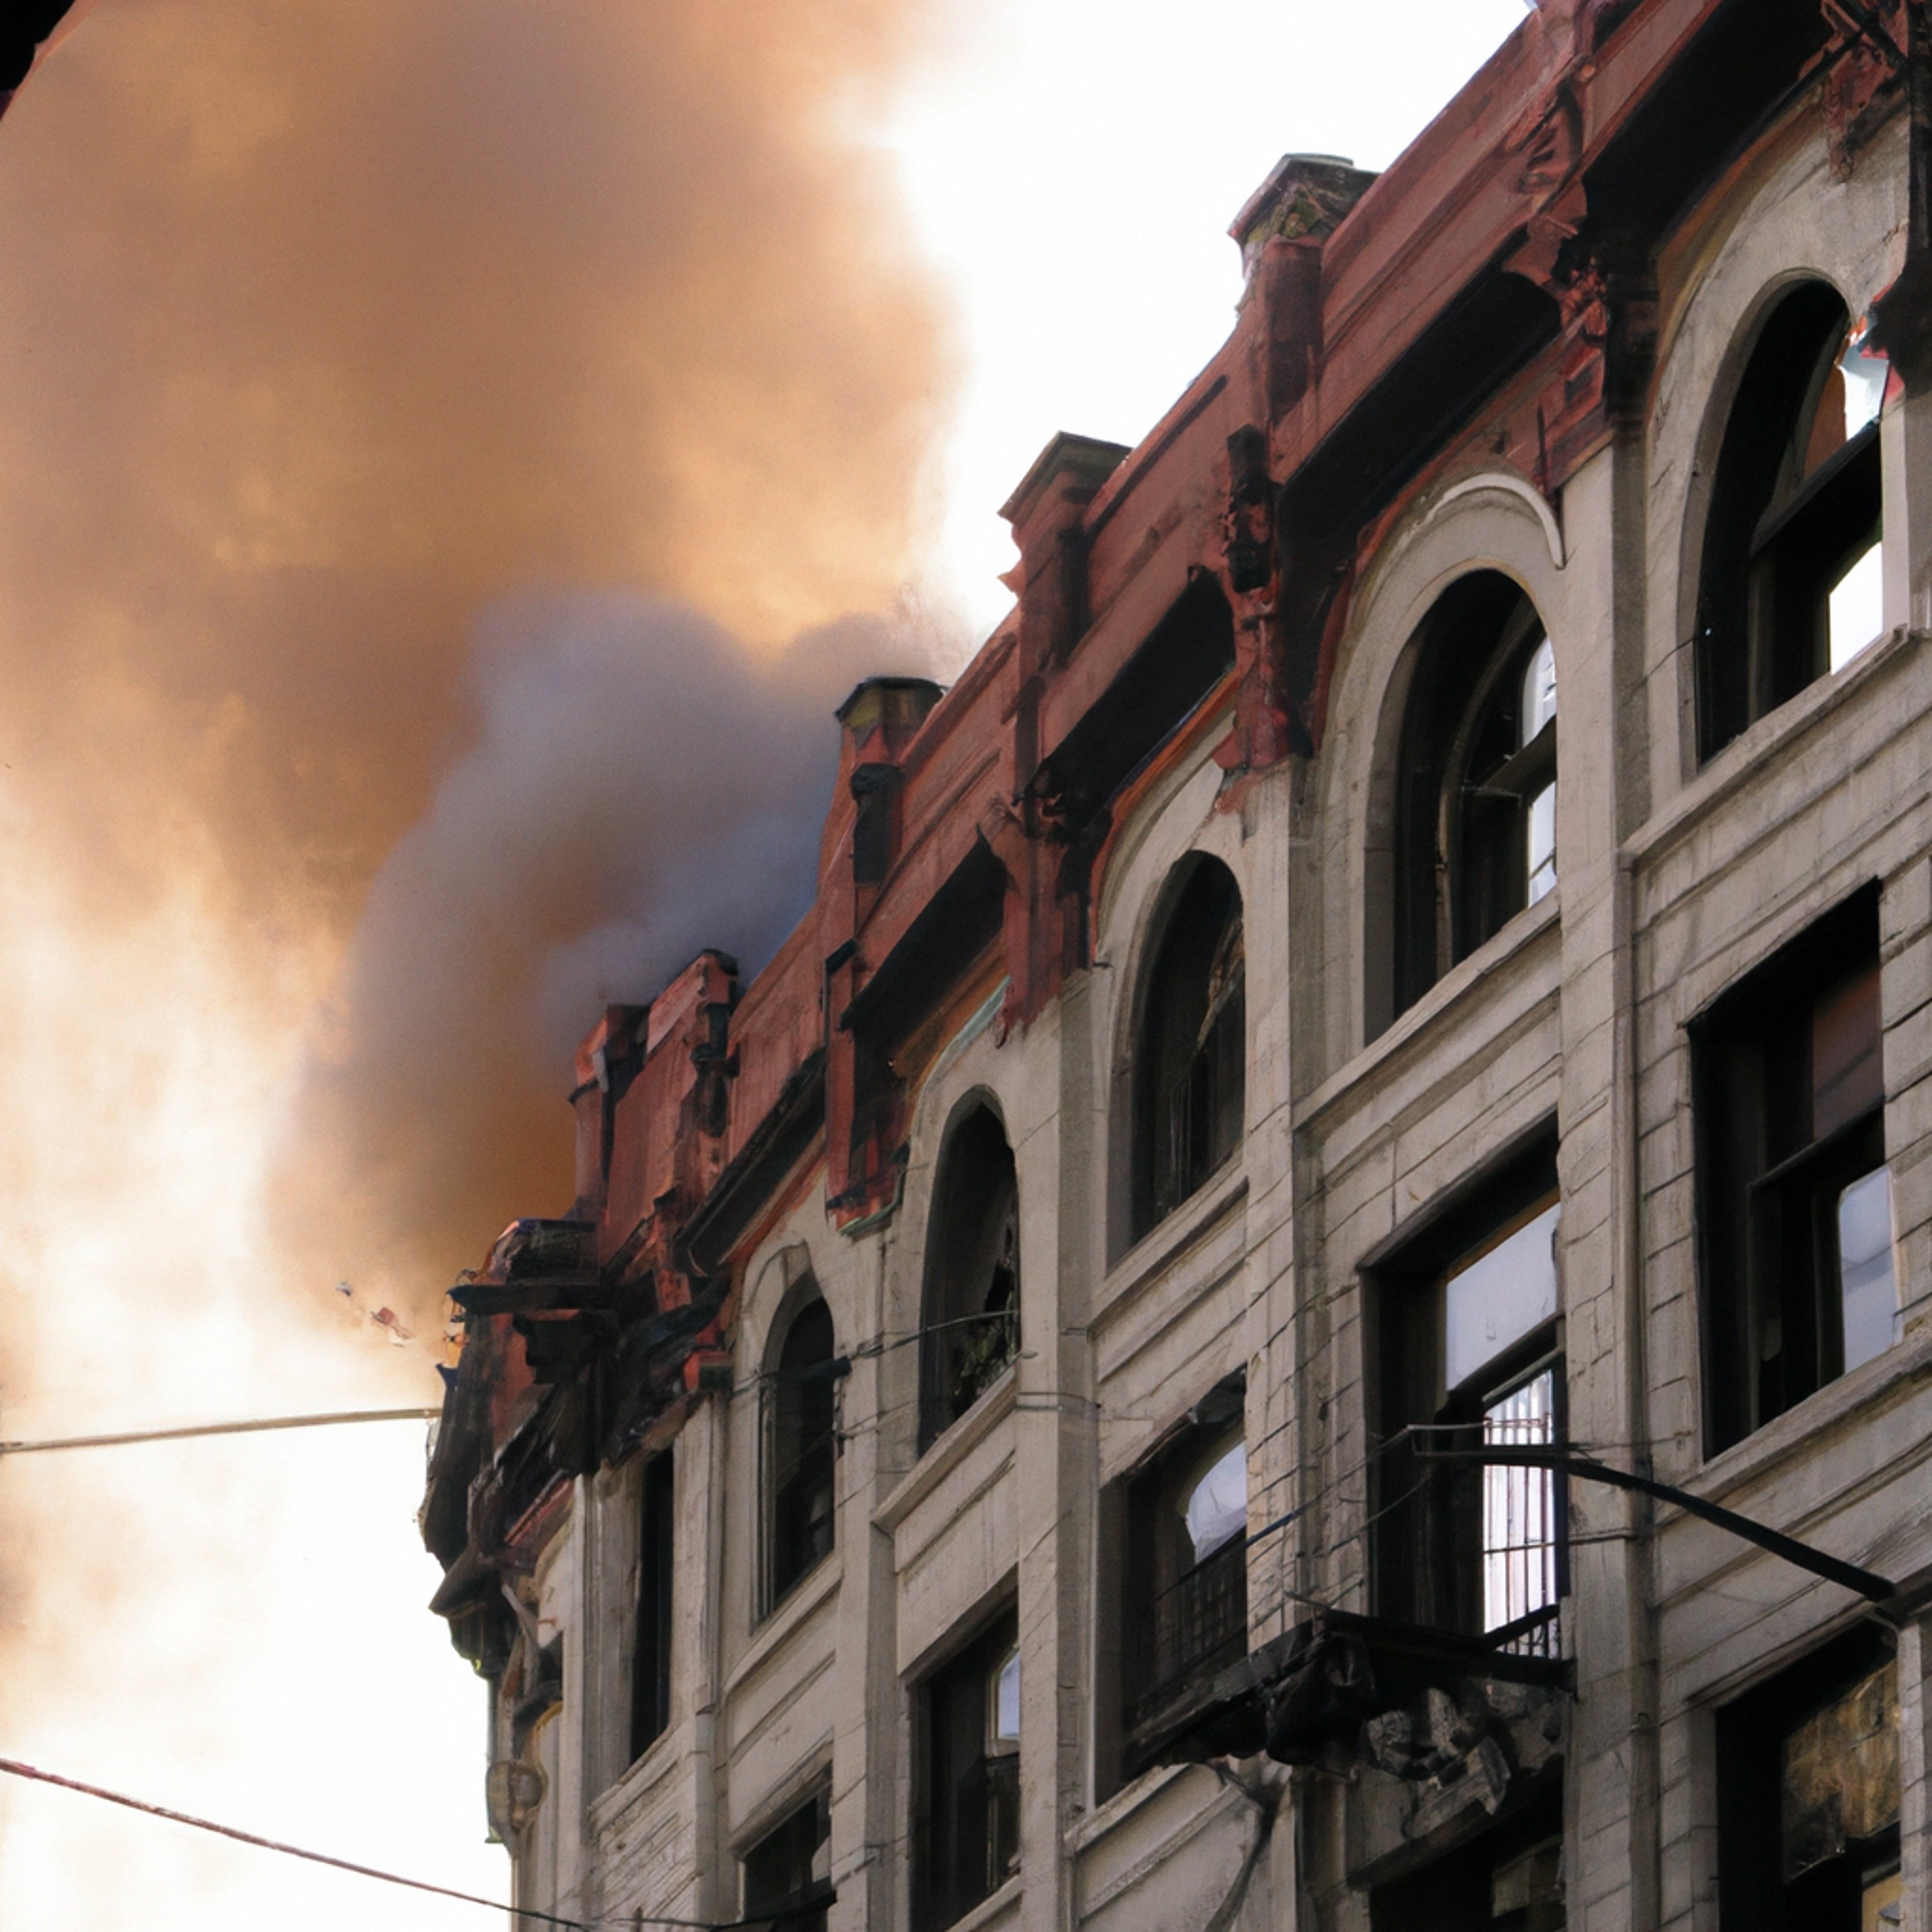 Massive Fire Engulfs Historic Building in Downtown Area